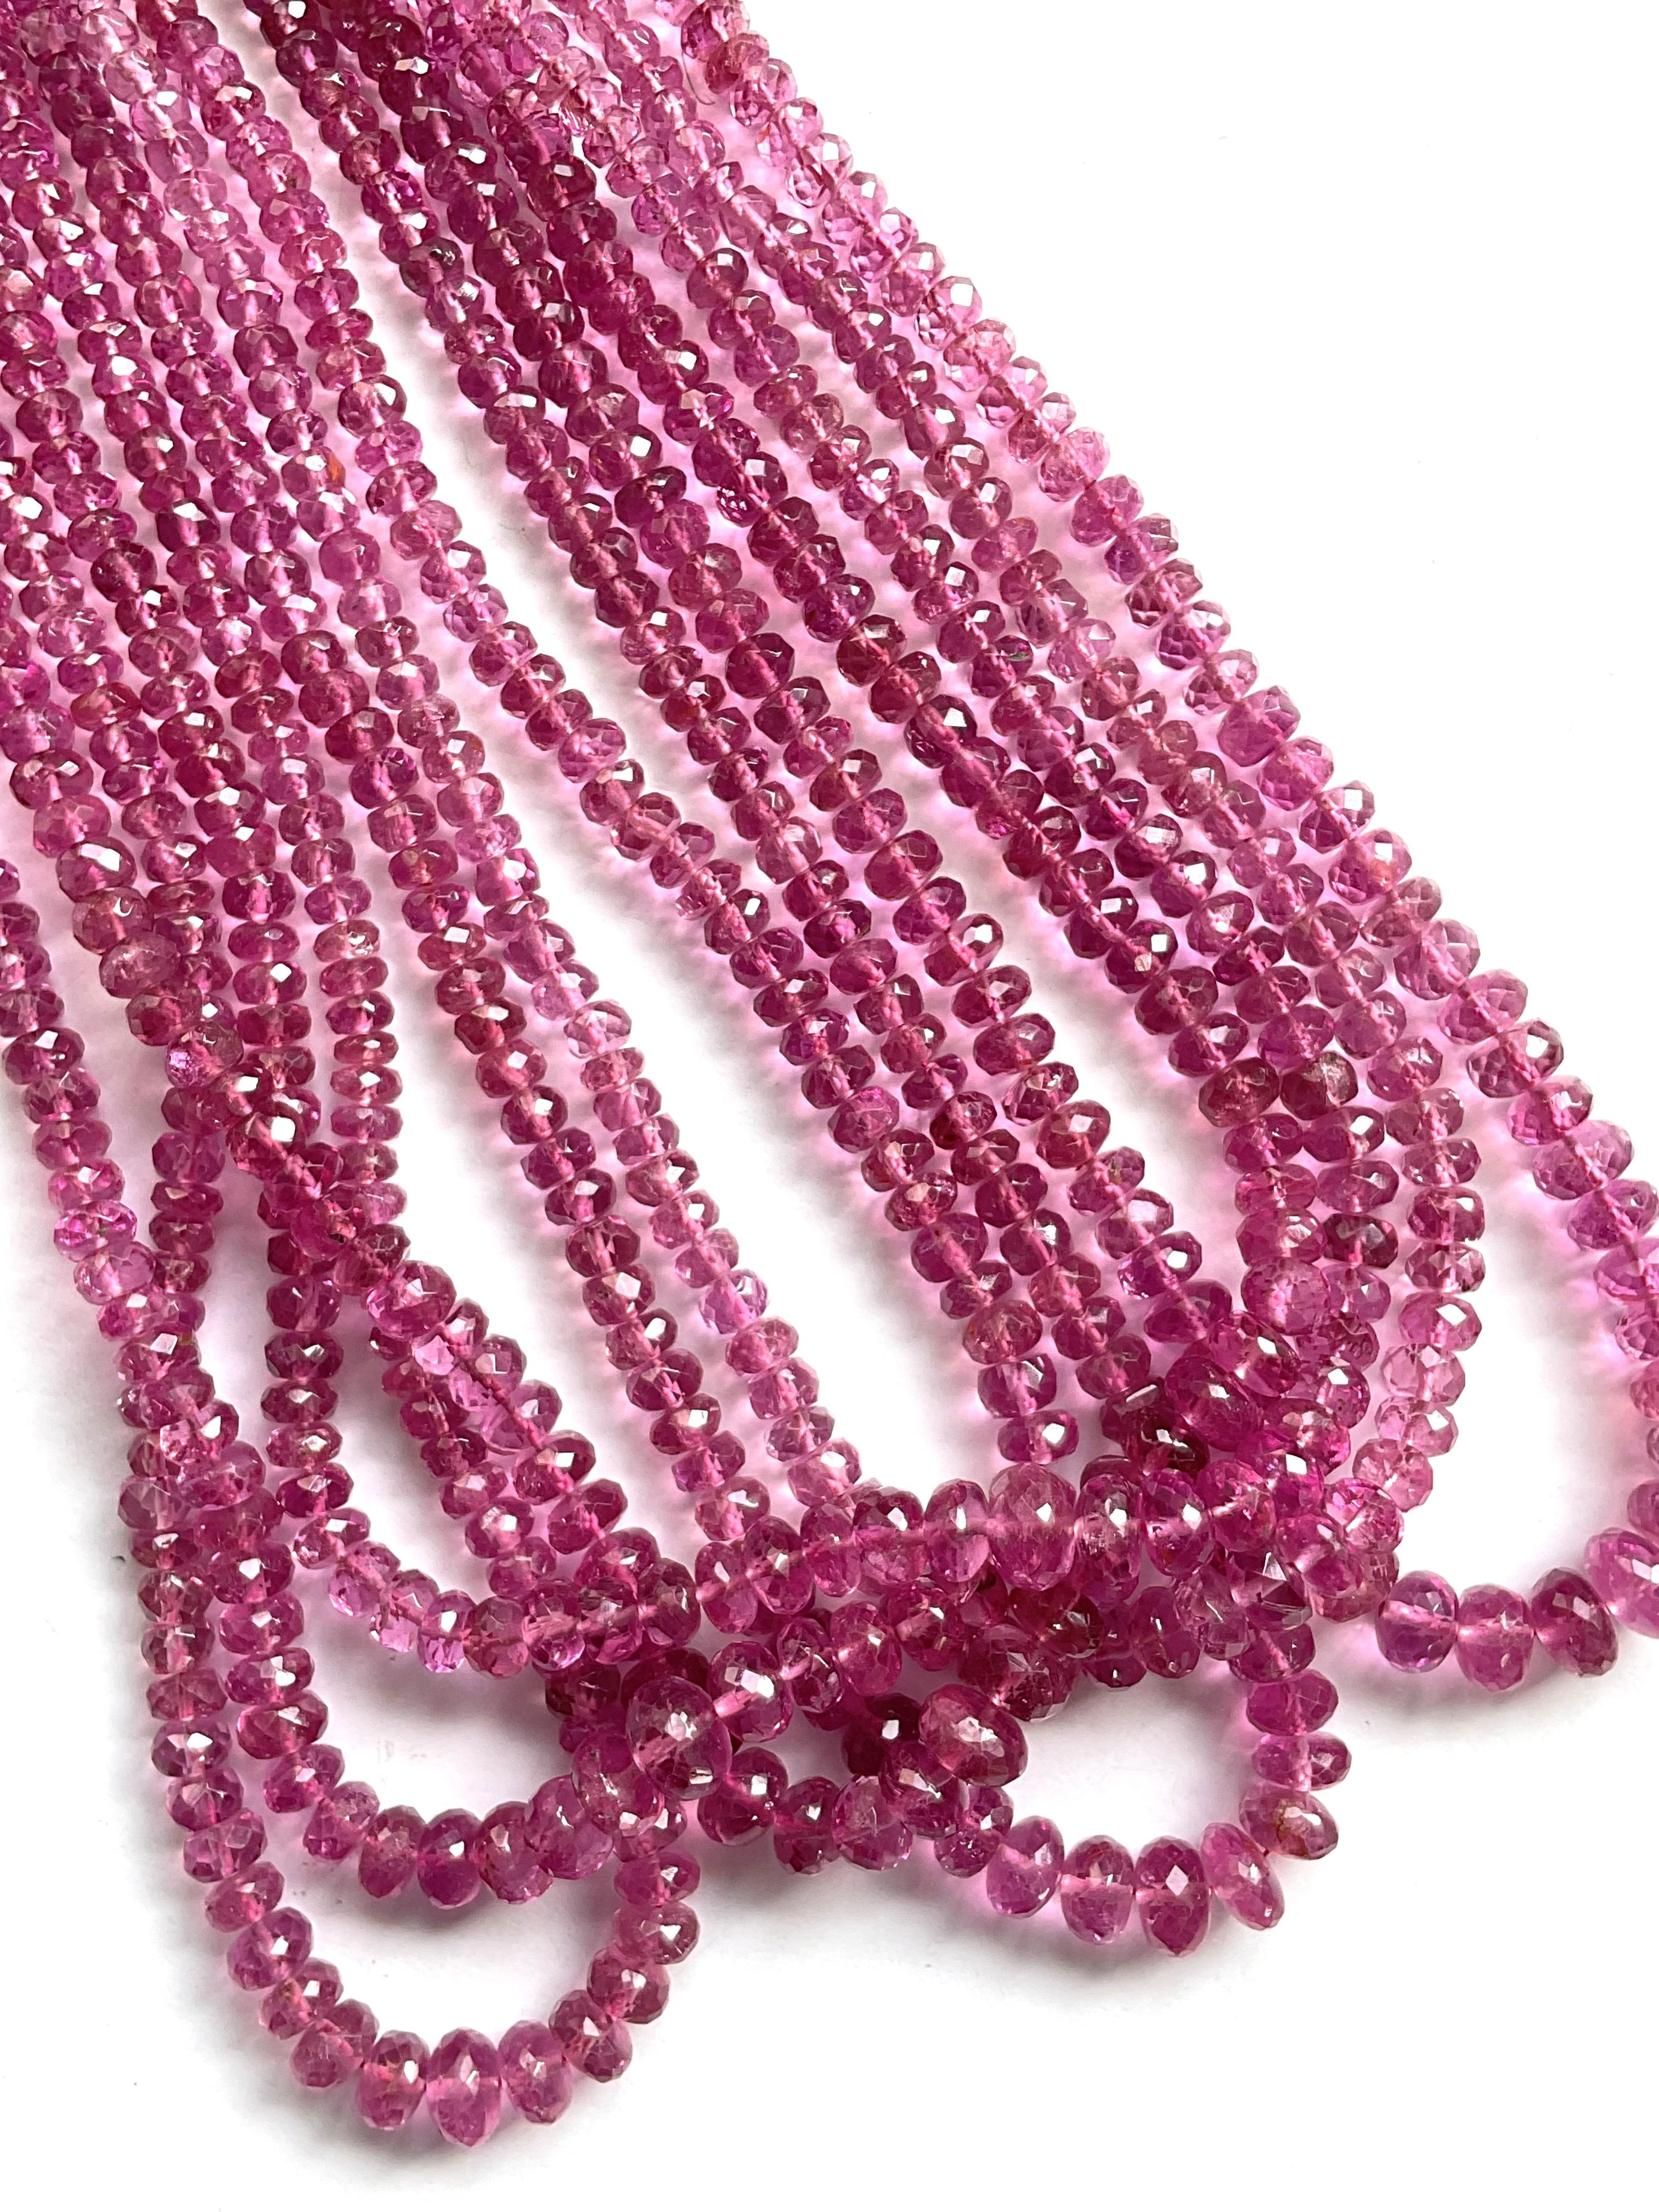 346.25 Carats Pink Tourmaline Beads Top Fine Quality For Jewelry Natural Gem For Sale 2